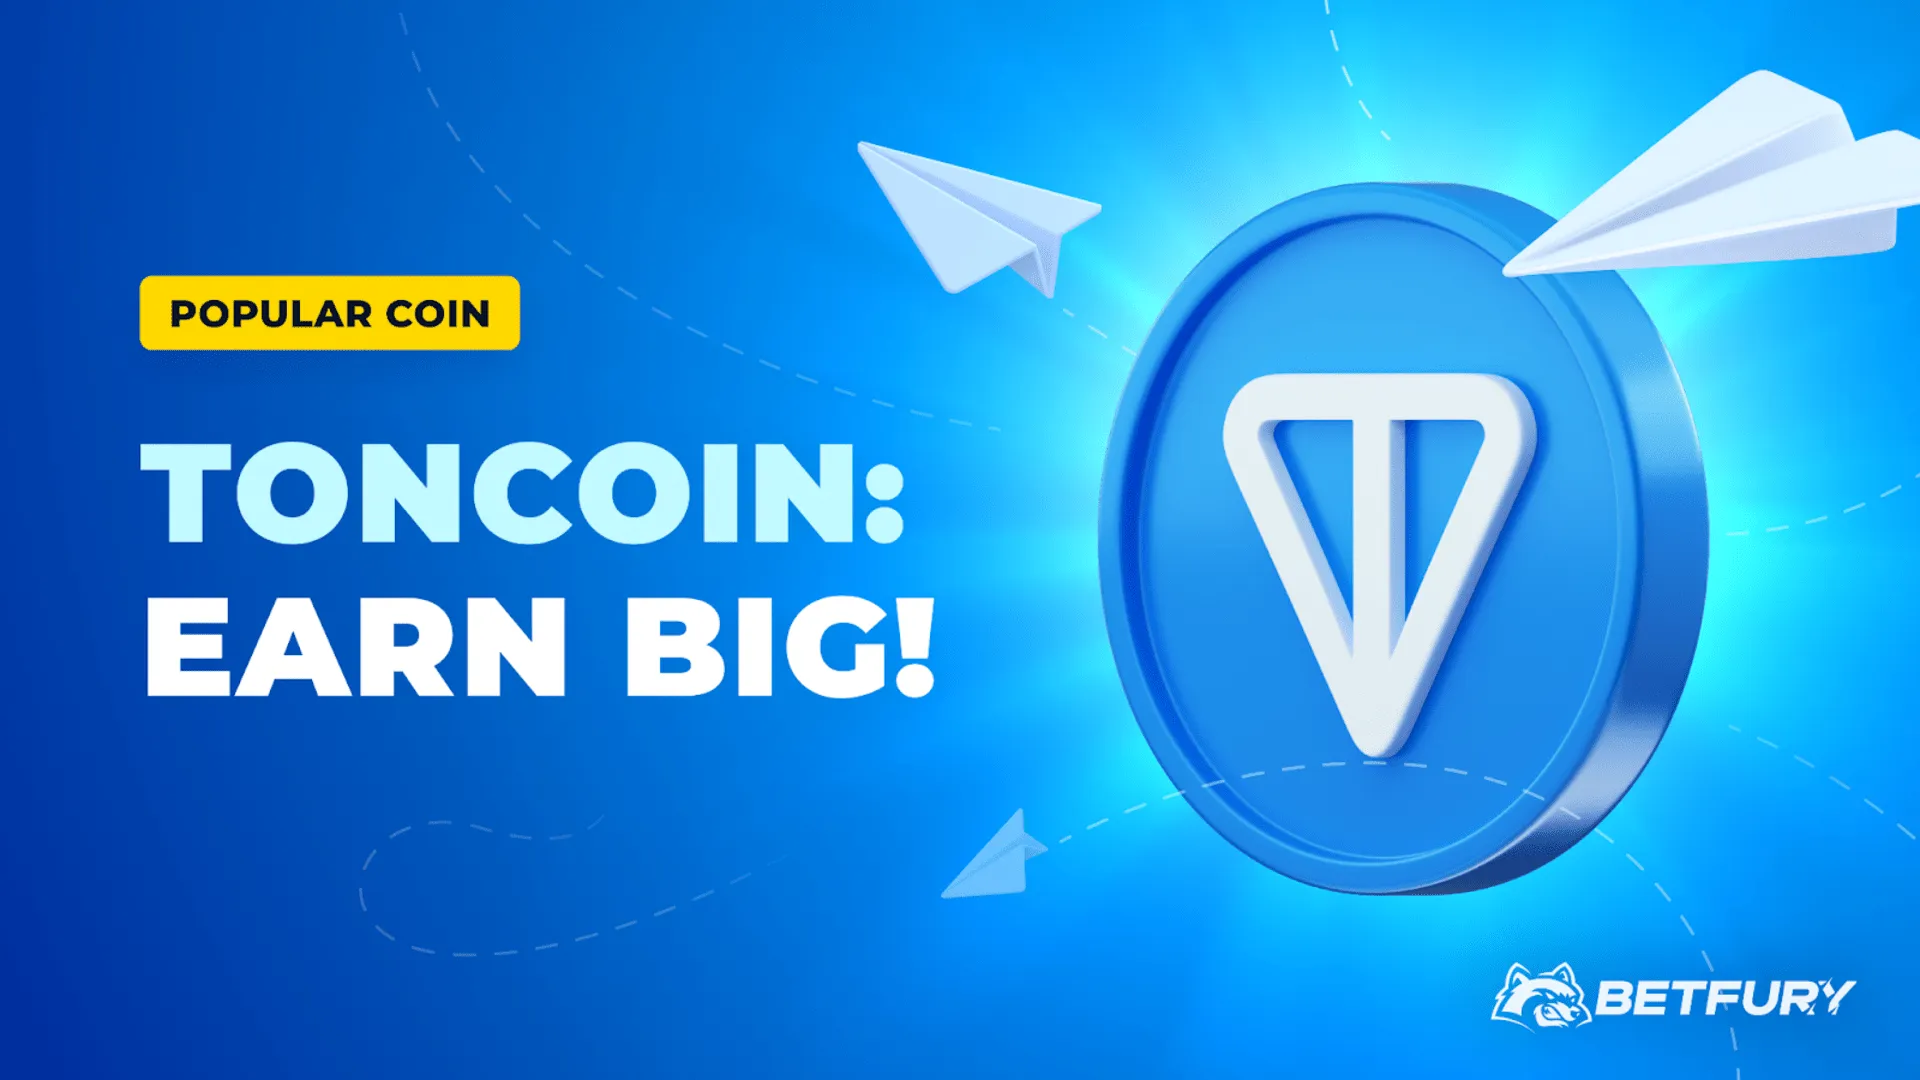 How to Earn with Toncoin on its Popularity Peak?